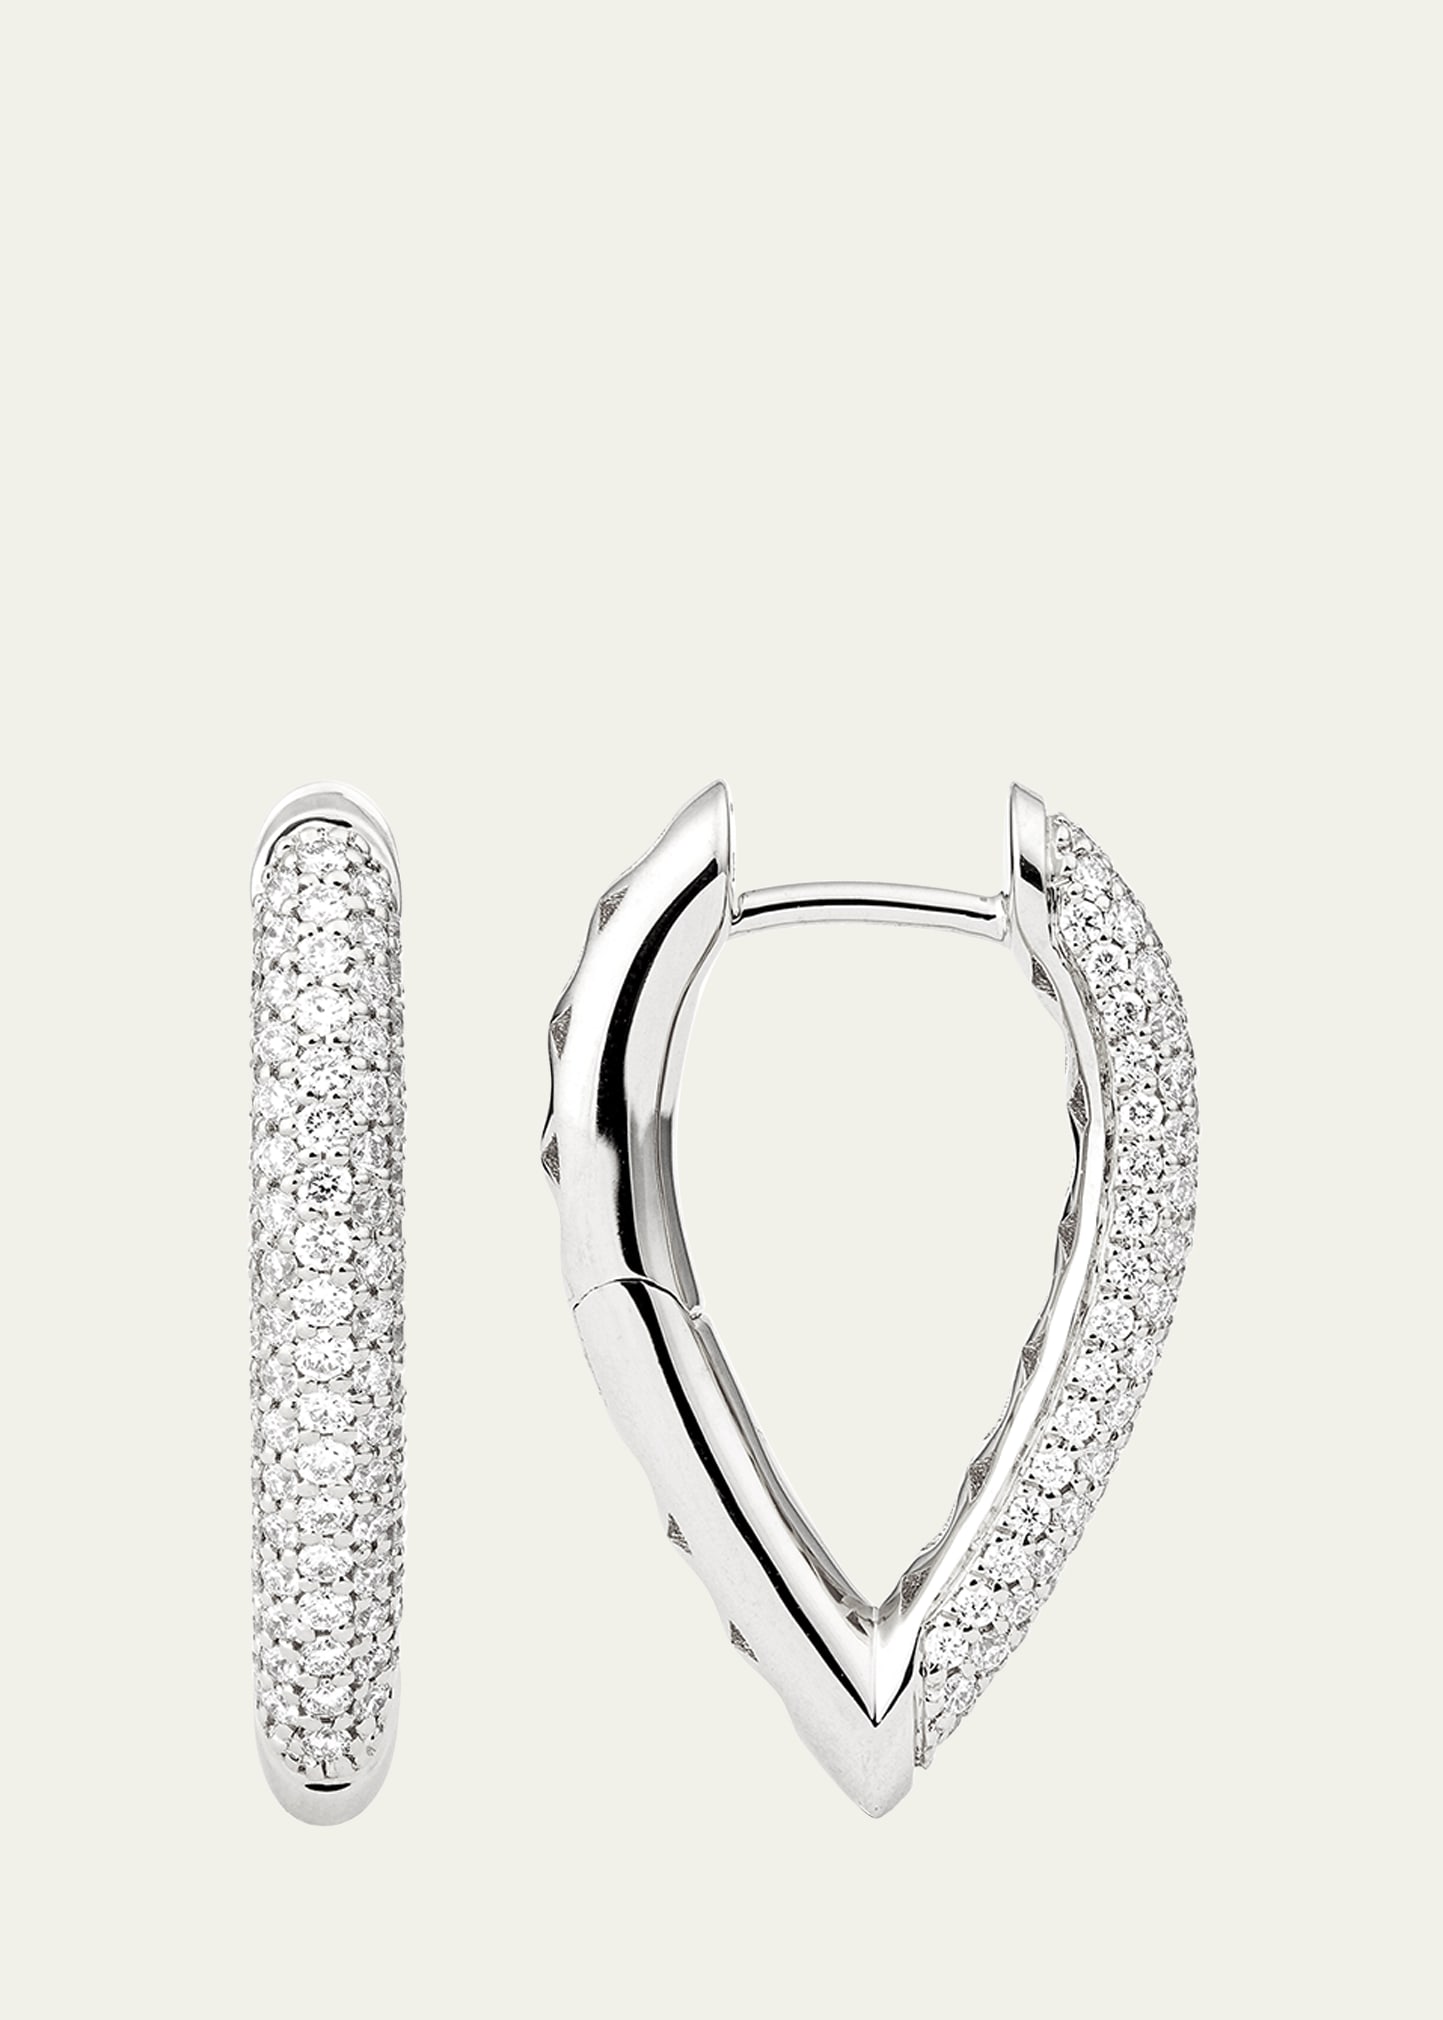 The Drop Link Earrings, Small, in White Gold and White Diamonds